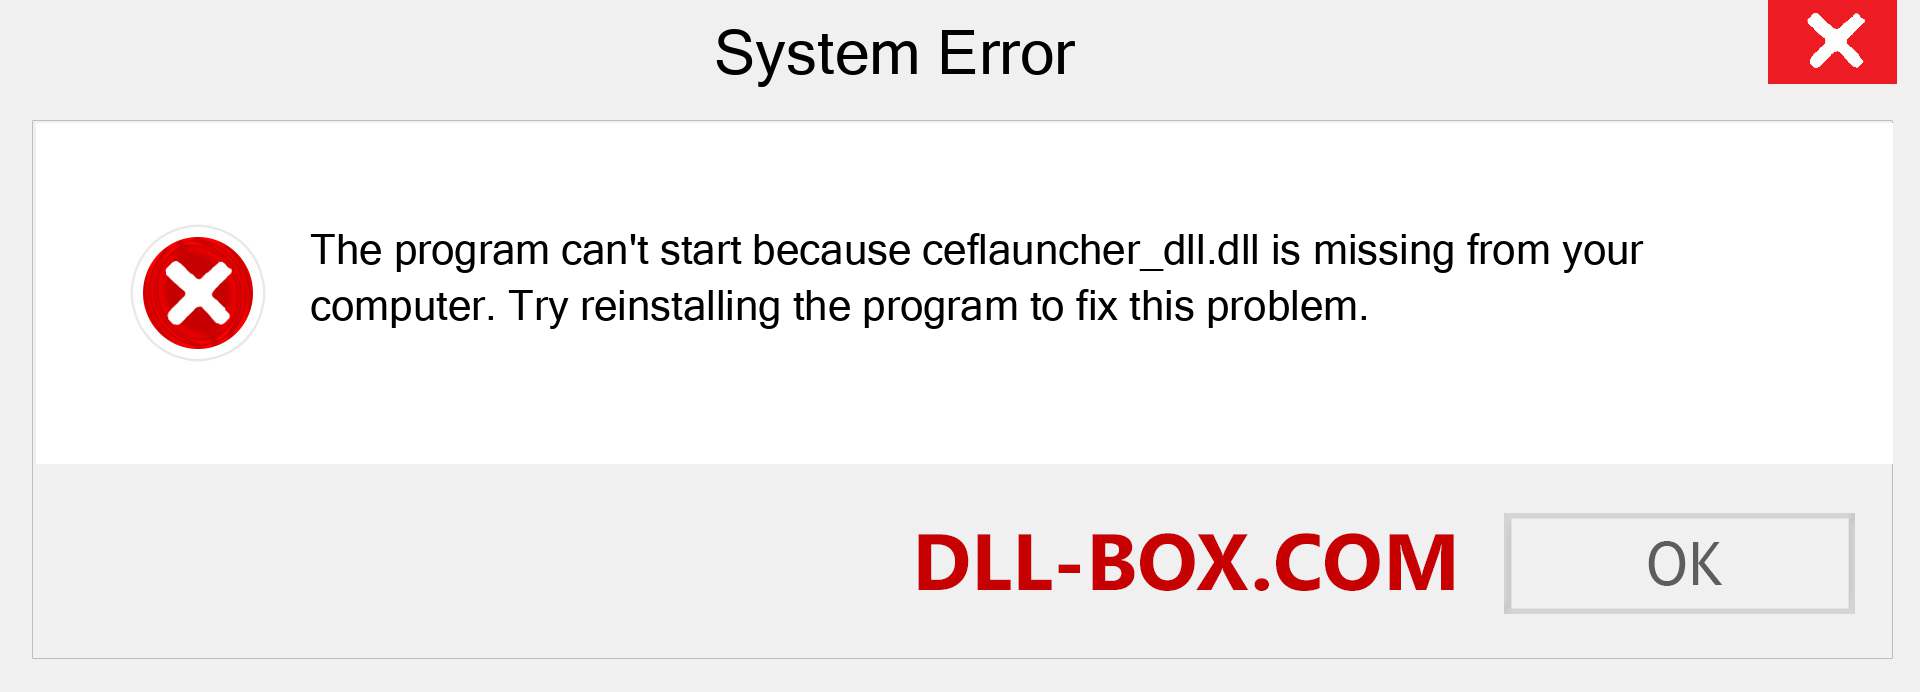  ceflauncher_dll.dll file is missing?. Download for Windows 7, 8, 10 - Fix  ceflauncher_dll dll Missing Error on Windows, photos, images